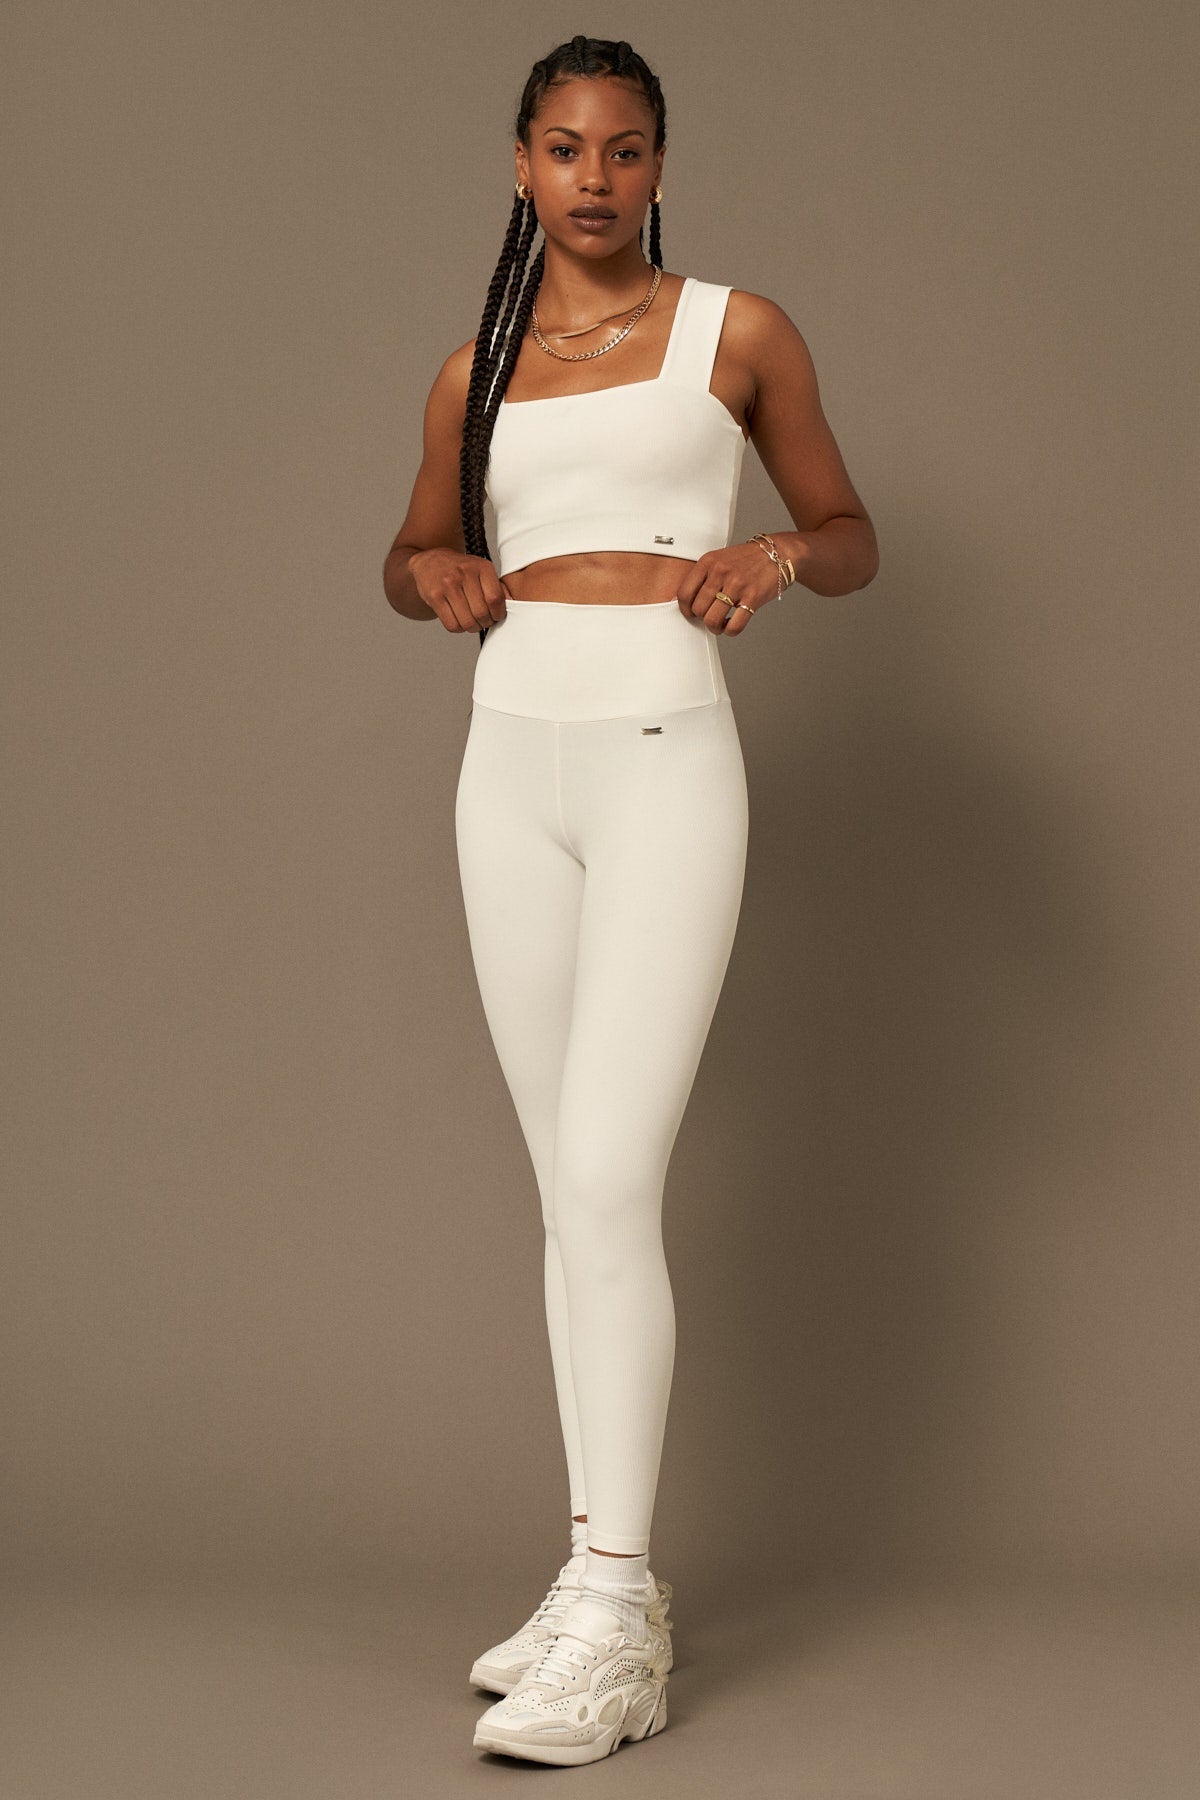 Silver Lake Bra in Pearl White-Bras-Shop Clothing Sustainable Recycled Yoga Leggings Women On-line Barcelona Believe Athletics Sustainable Recycled Yoga Clothes